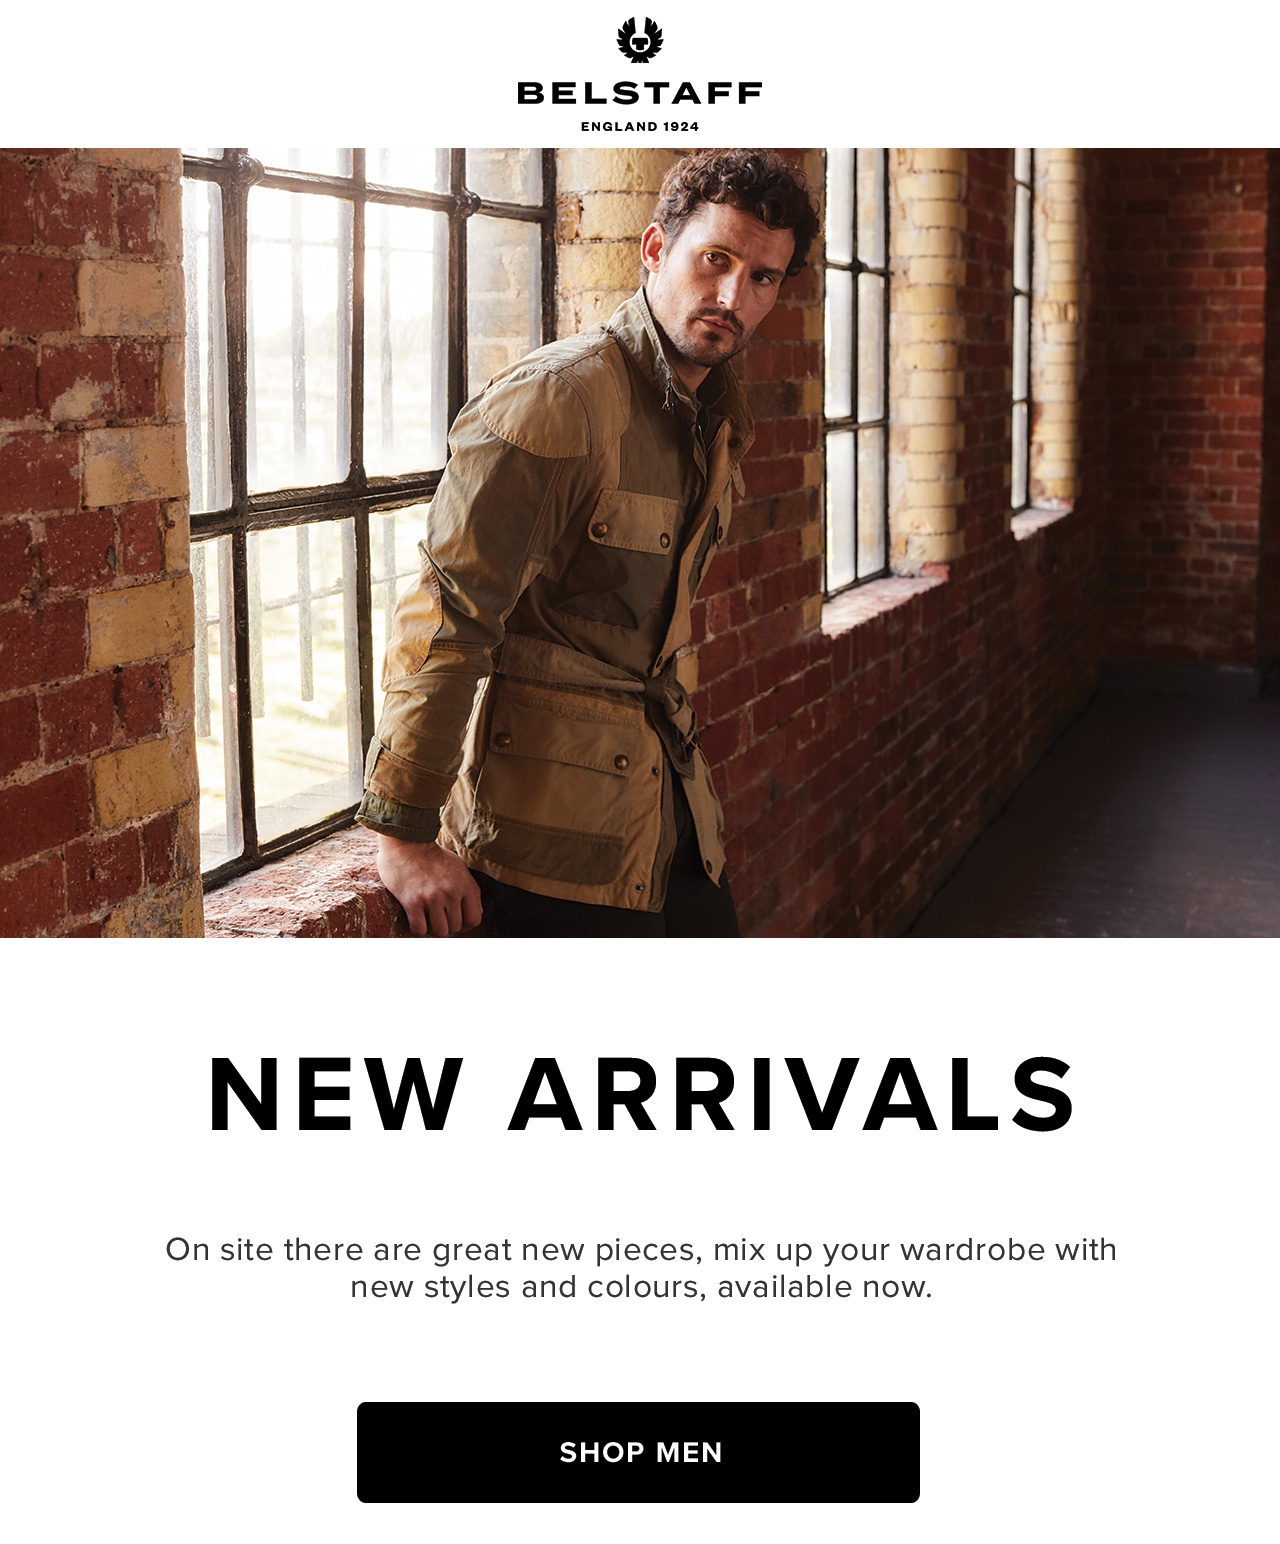 On site there are great new pieces, mix up your wardrobe with new styles and colours, available now.